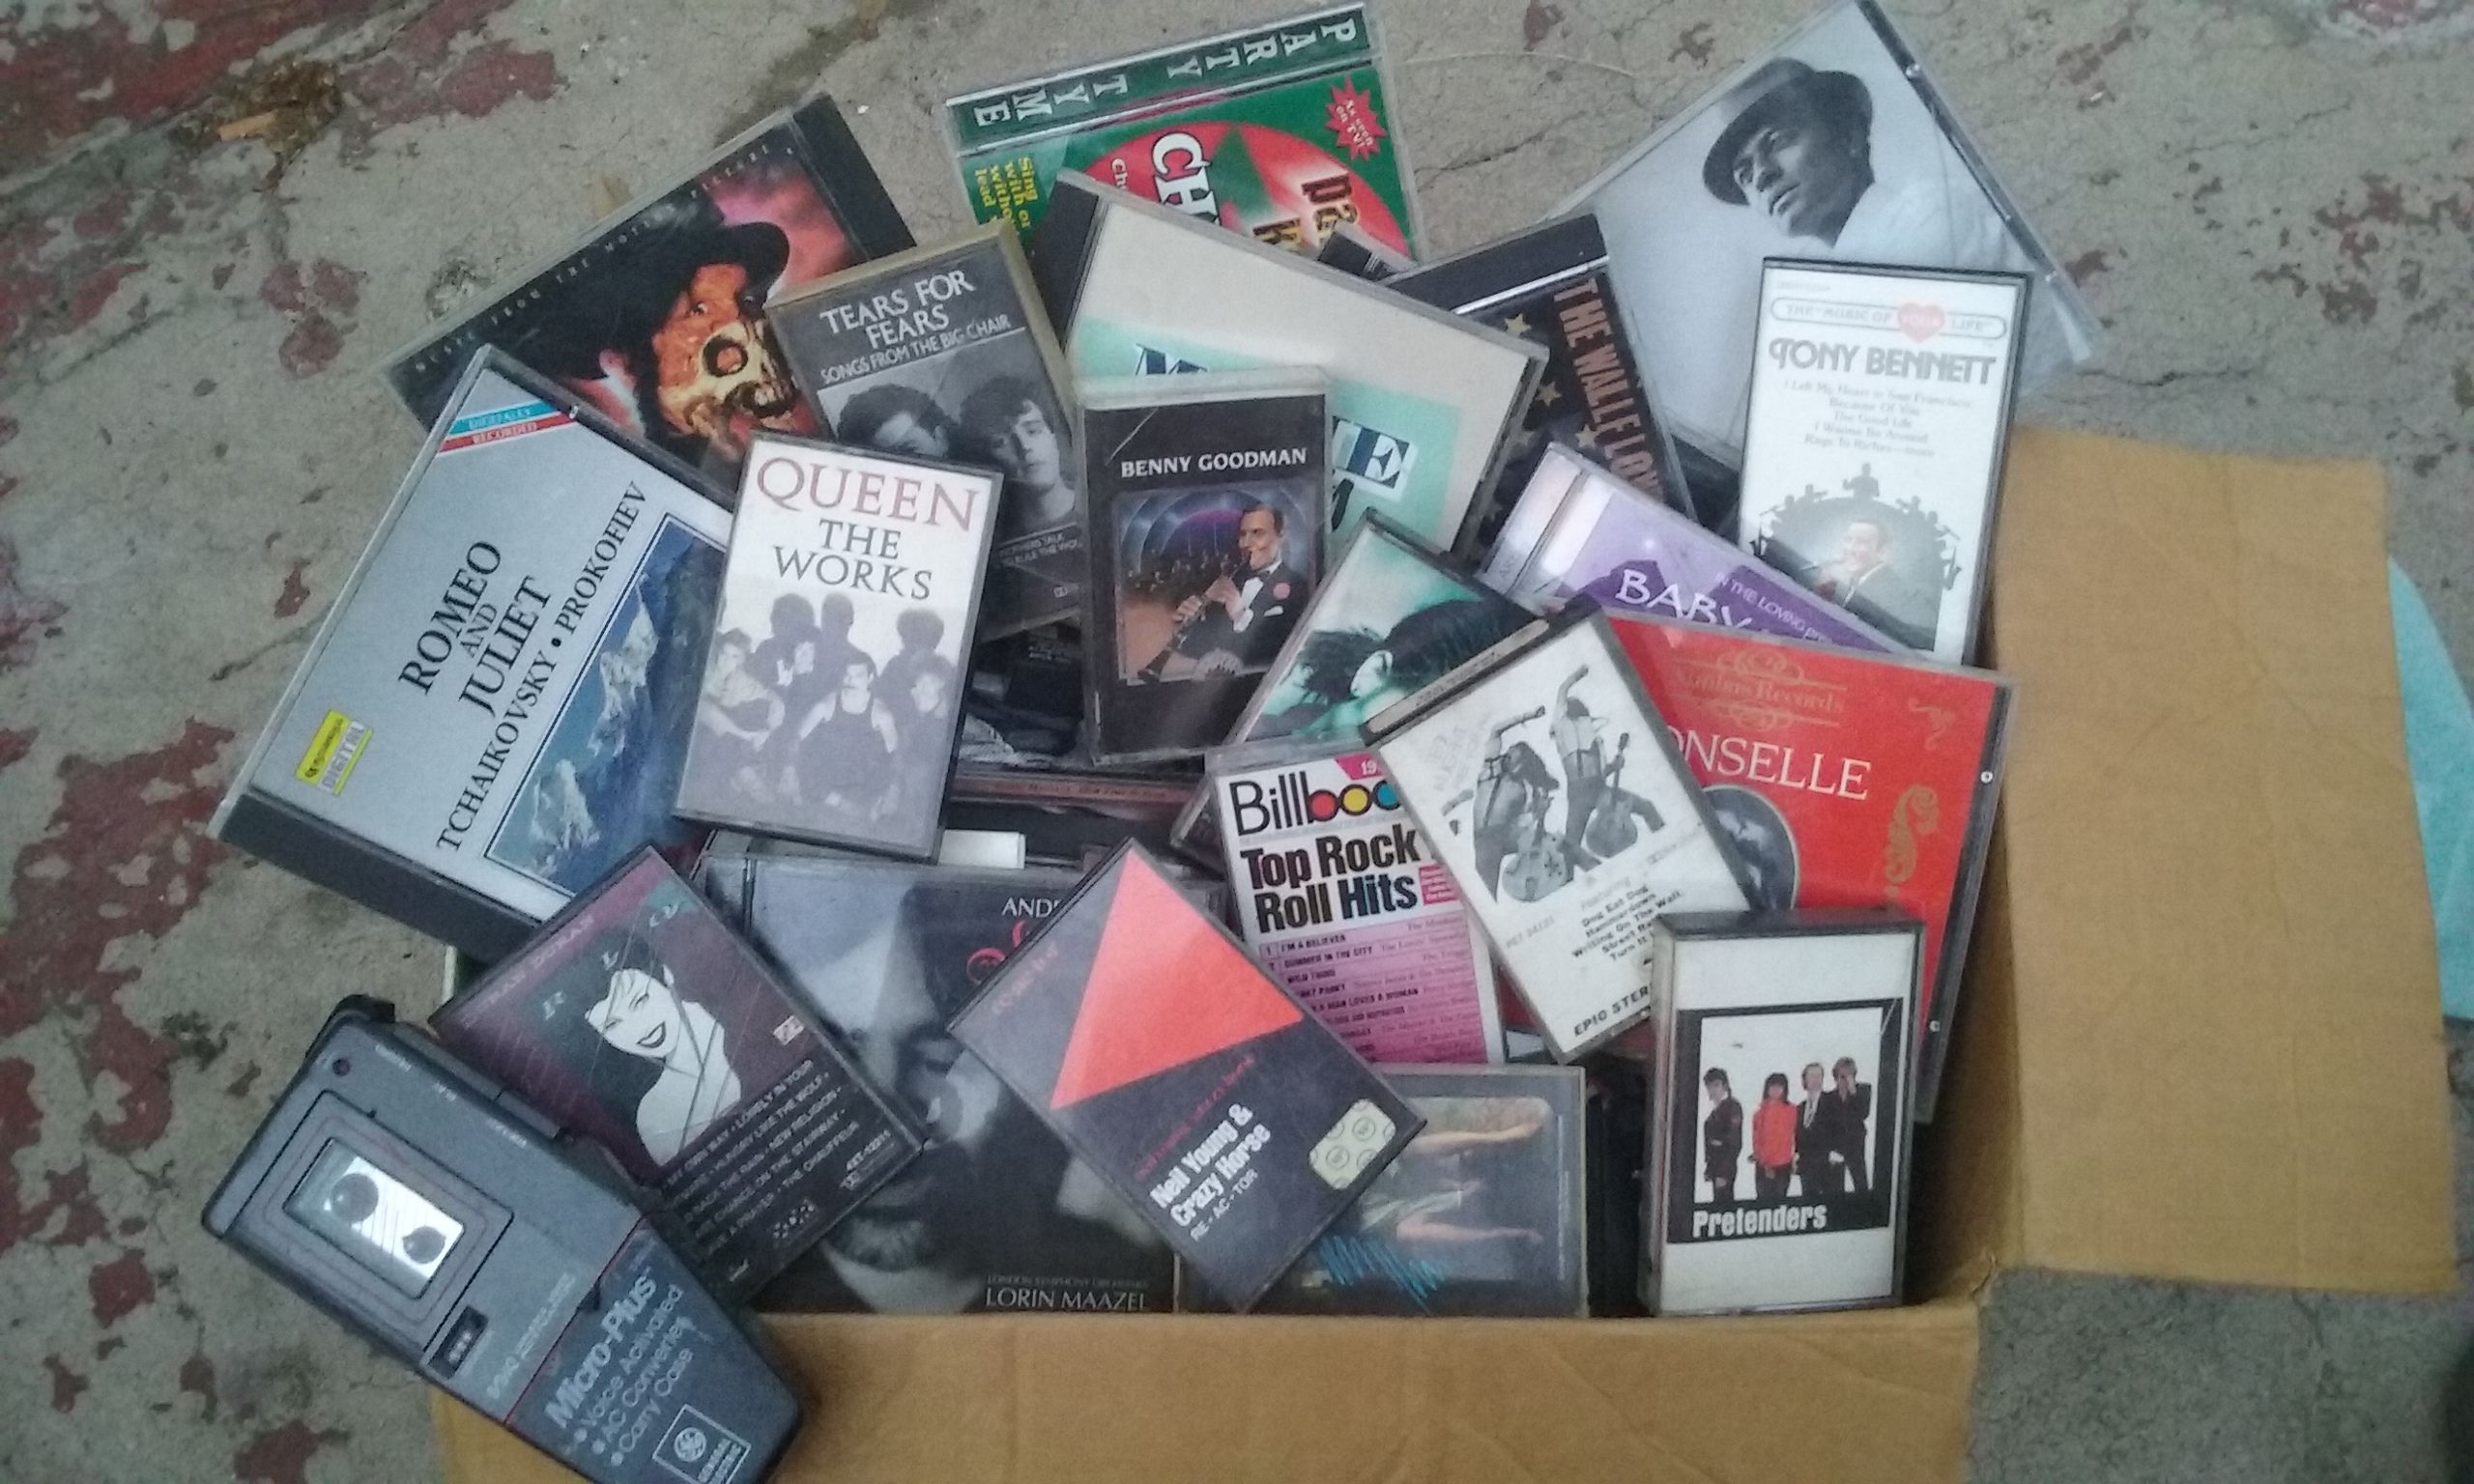 BOX FULL of old school tapes and cds from the 50's-90's